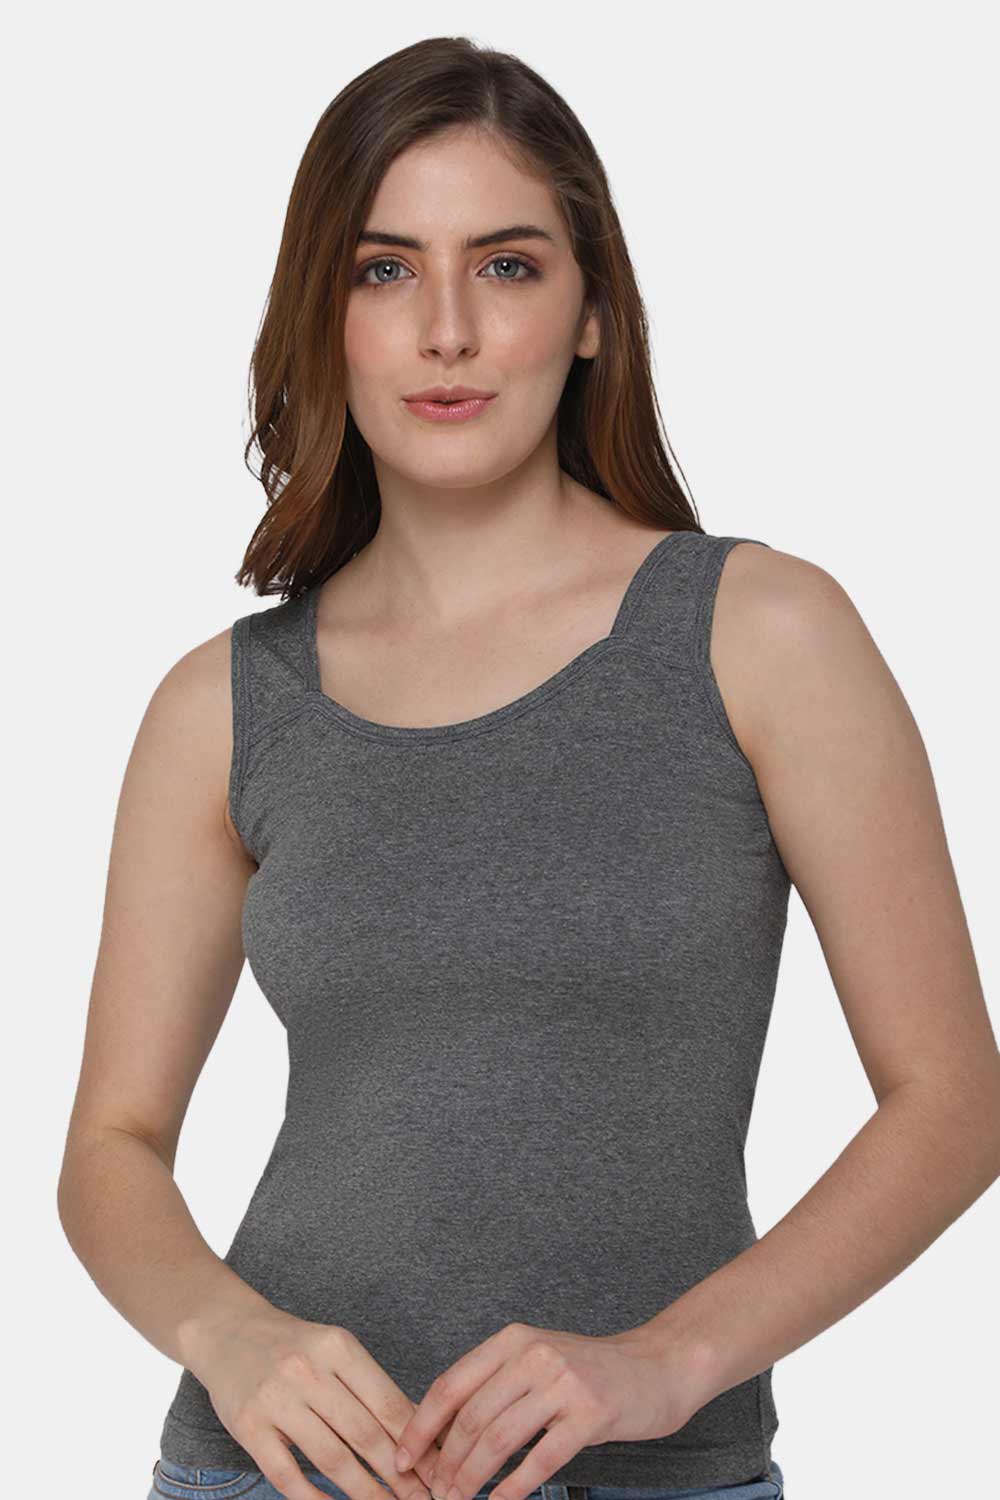 Buy online Women's Tank Top Round Neck Top from western wear for